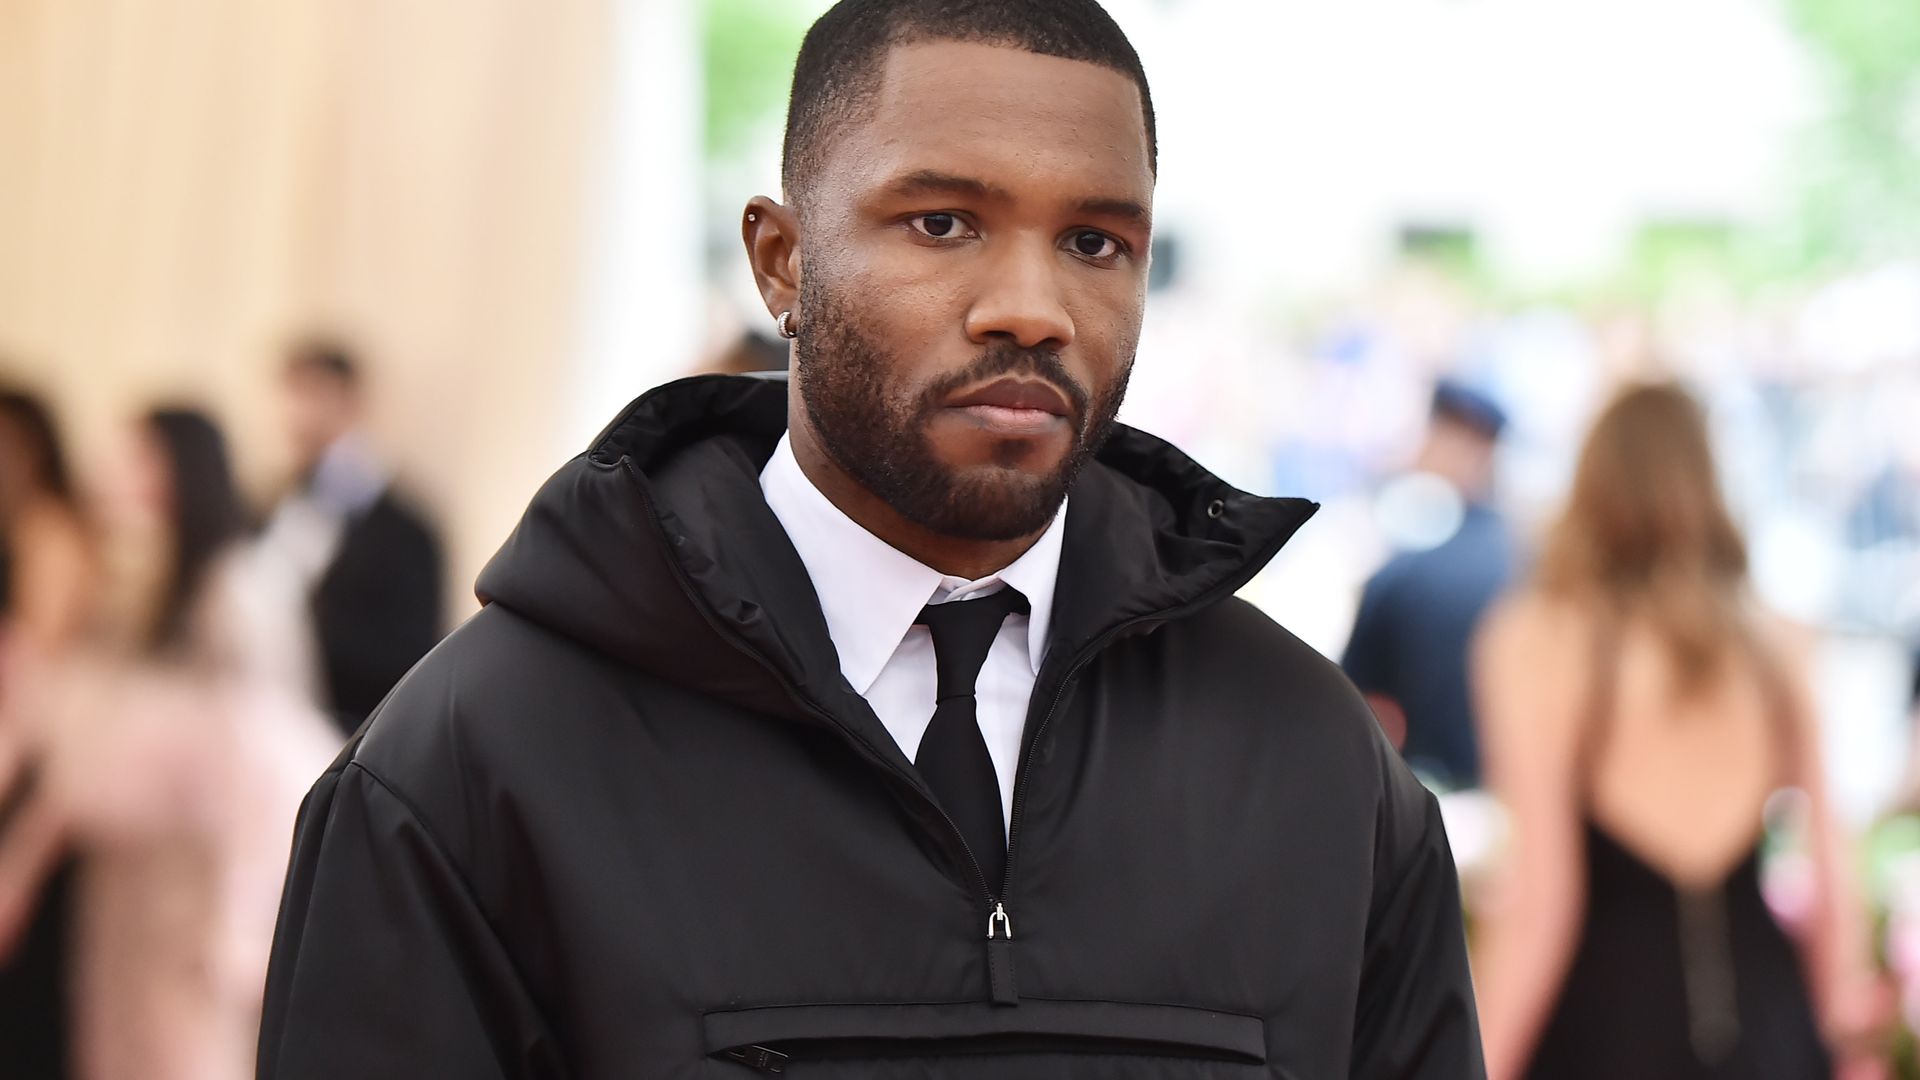 Frank Ocean attends The 2019 Met Gala Celebrating Camp: Notes on Fashion at Metropolitan Museum of Art on May 06, 2019 in New York City